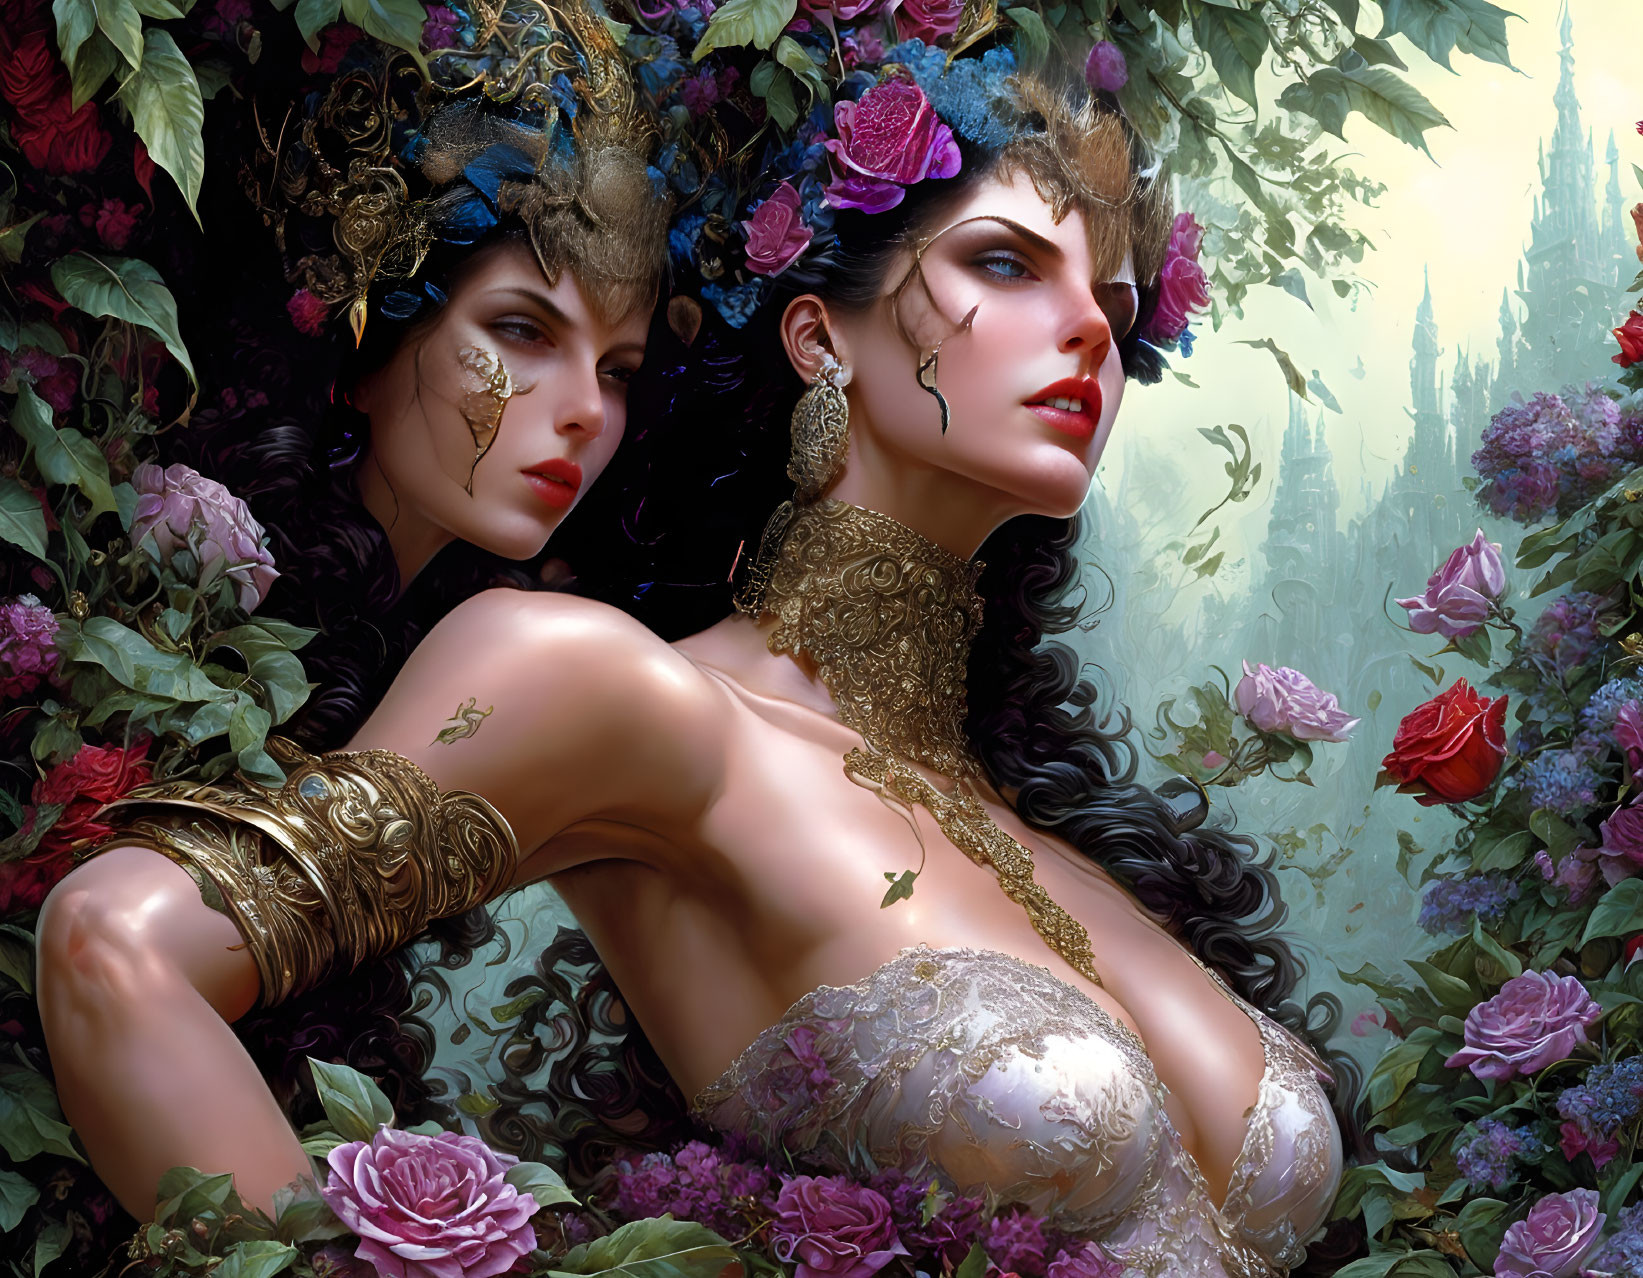 Two women in elaborate headpieces and golden jewelry among roses in a fantastical scene